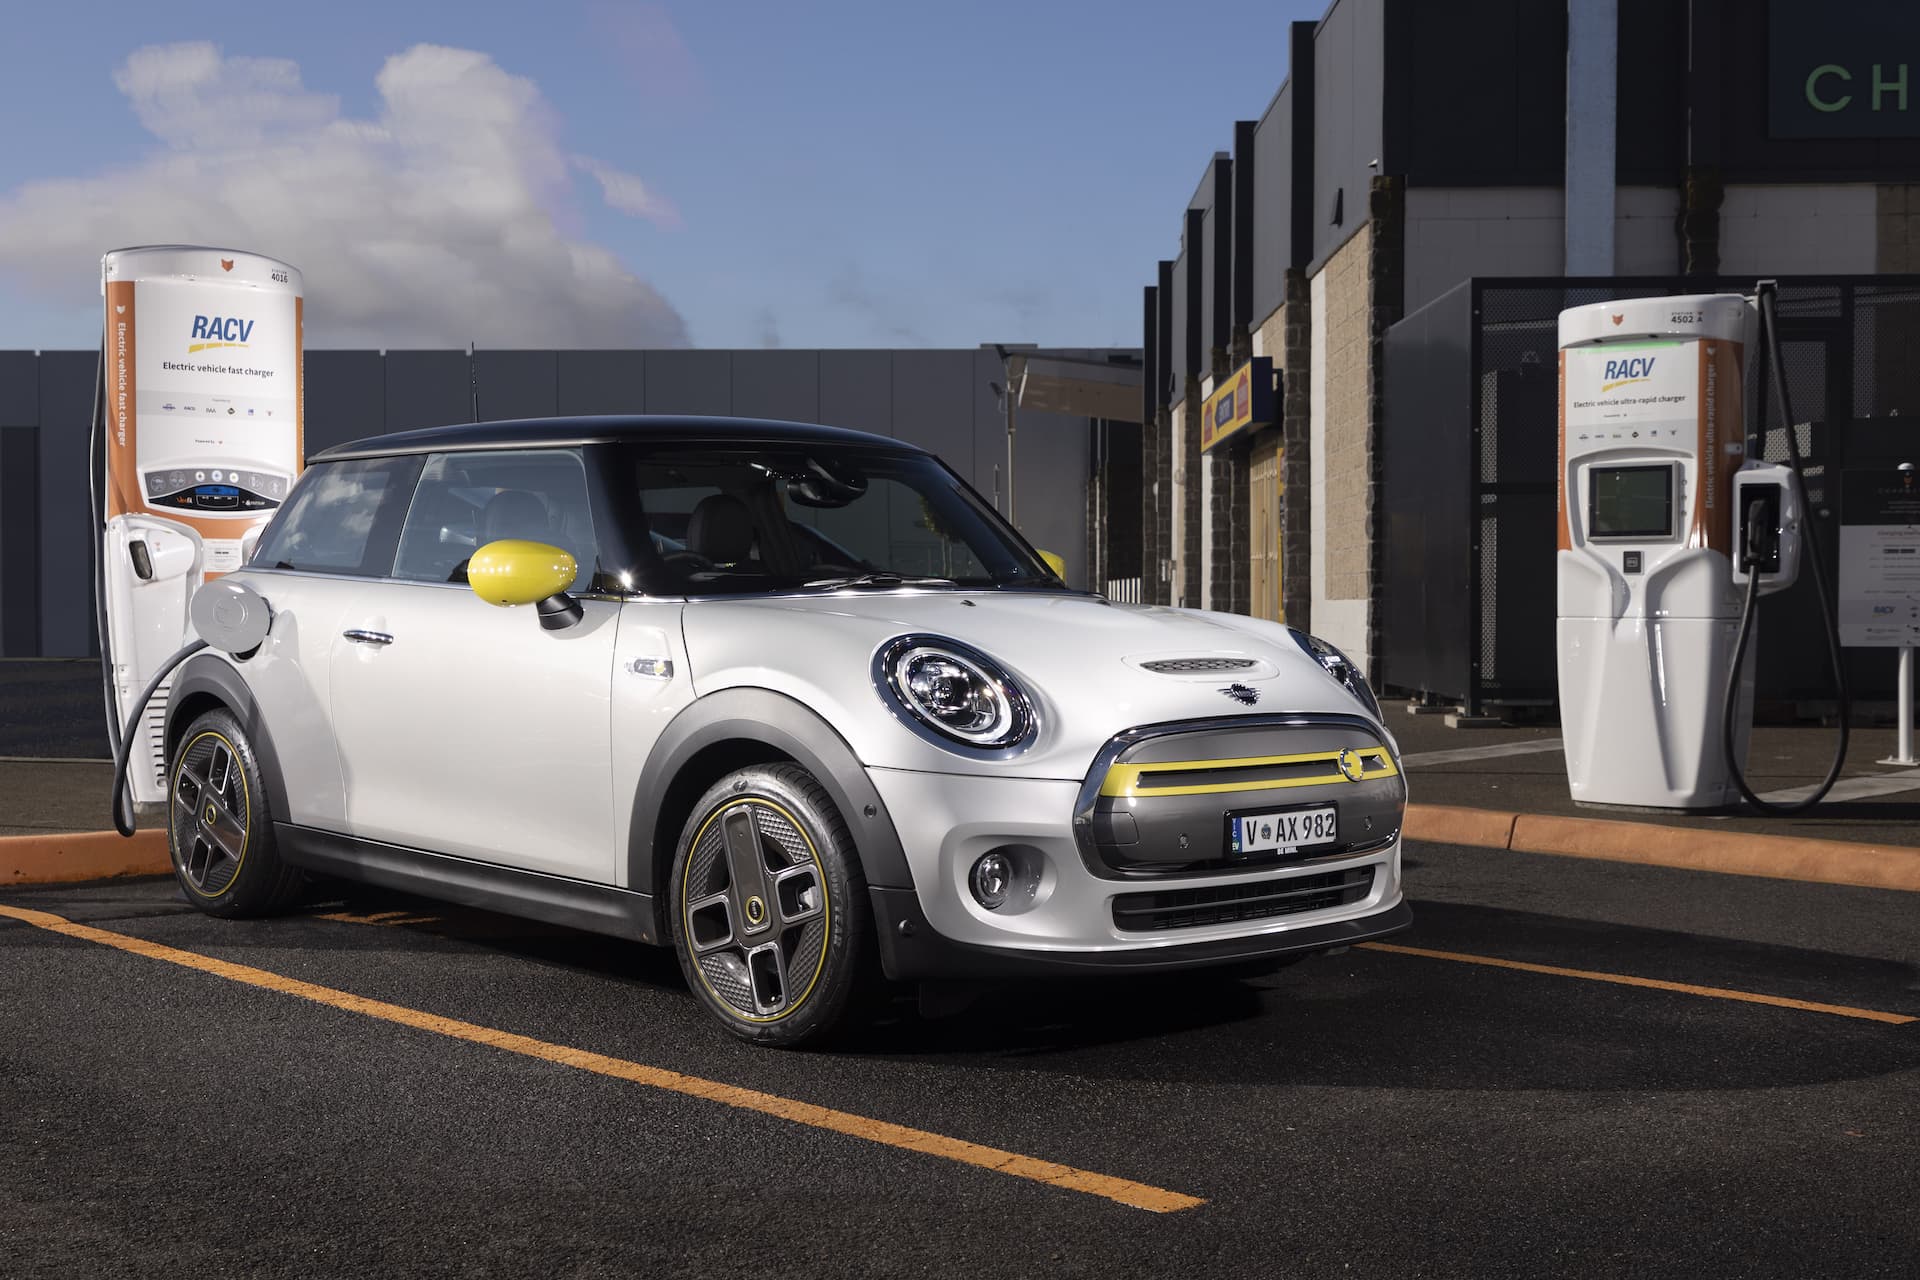 Mini Electric charging at 50kW RACV Chargefox fast charger